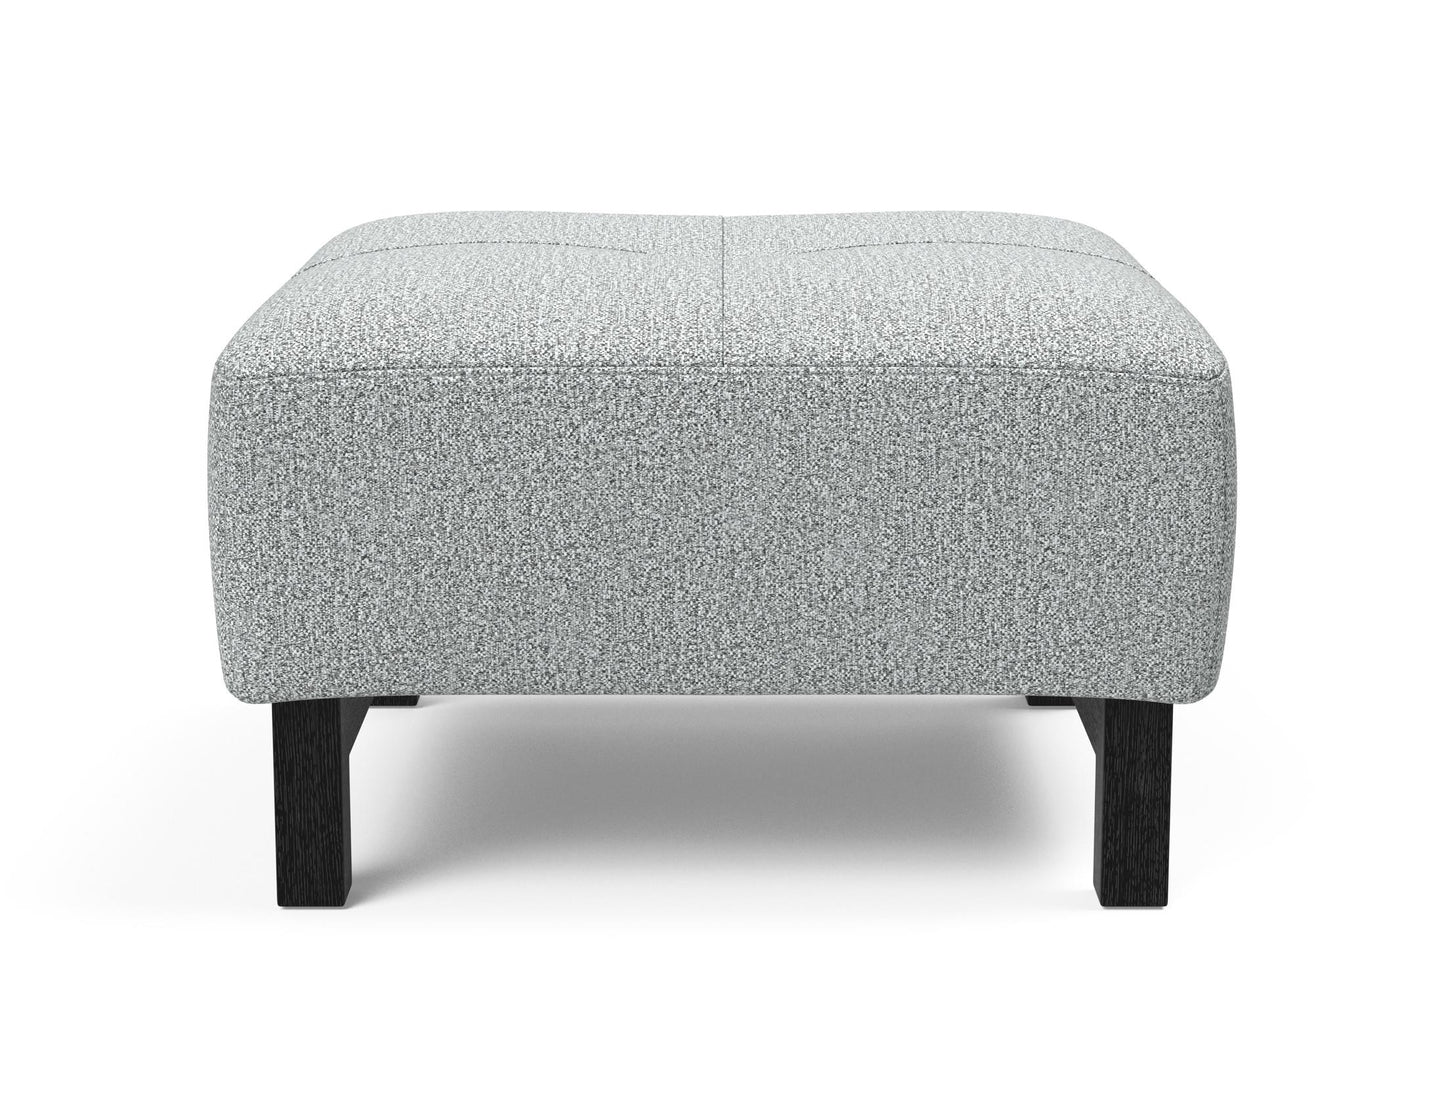 Deluxe Excess Ottoman